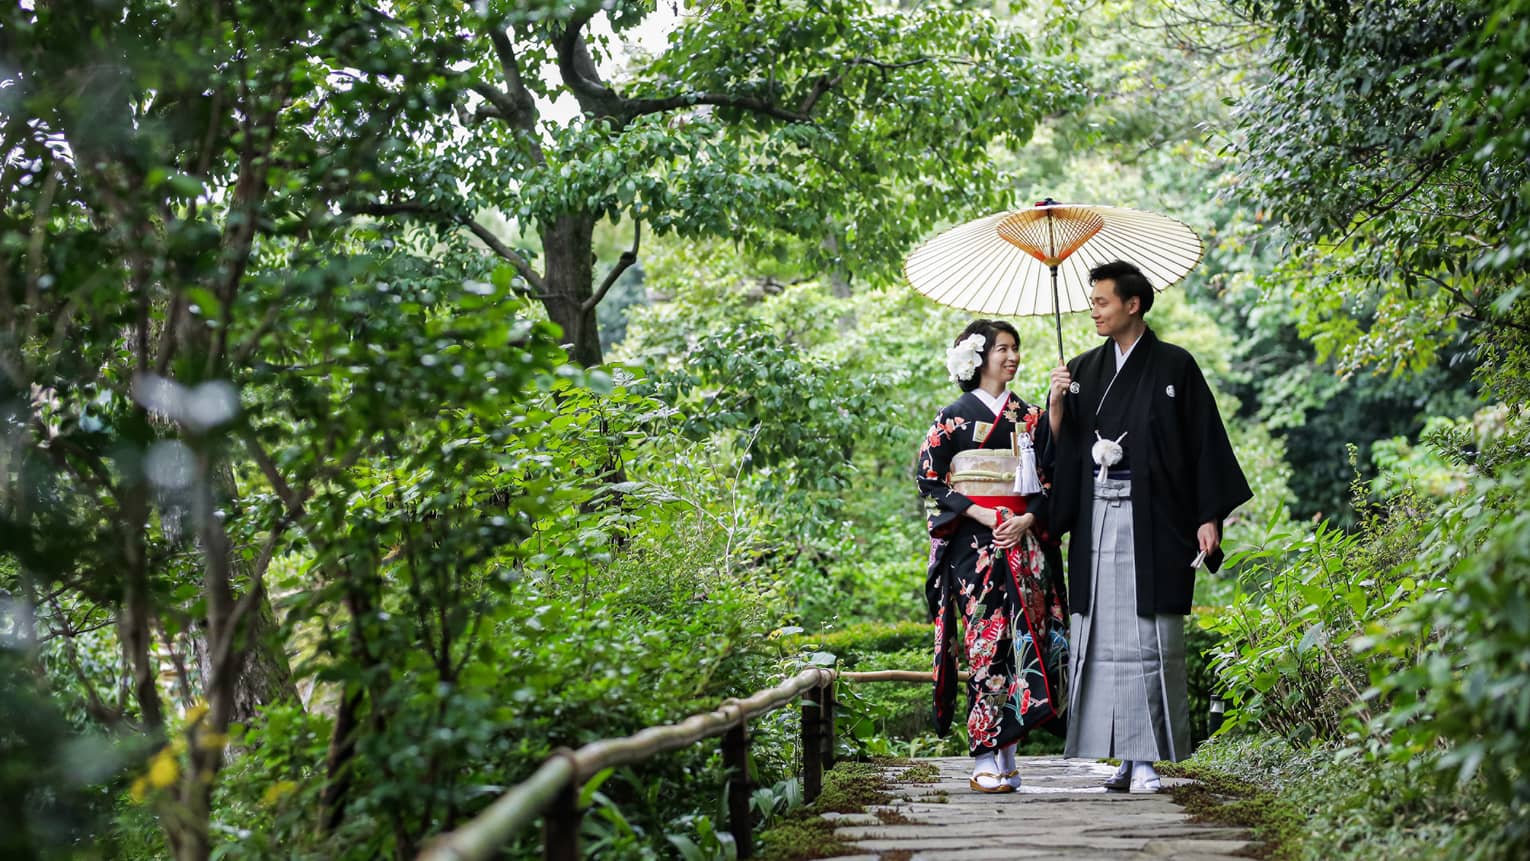 Couple wearing traditional Kyoto dress walk down stone path surrounded by trees